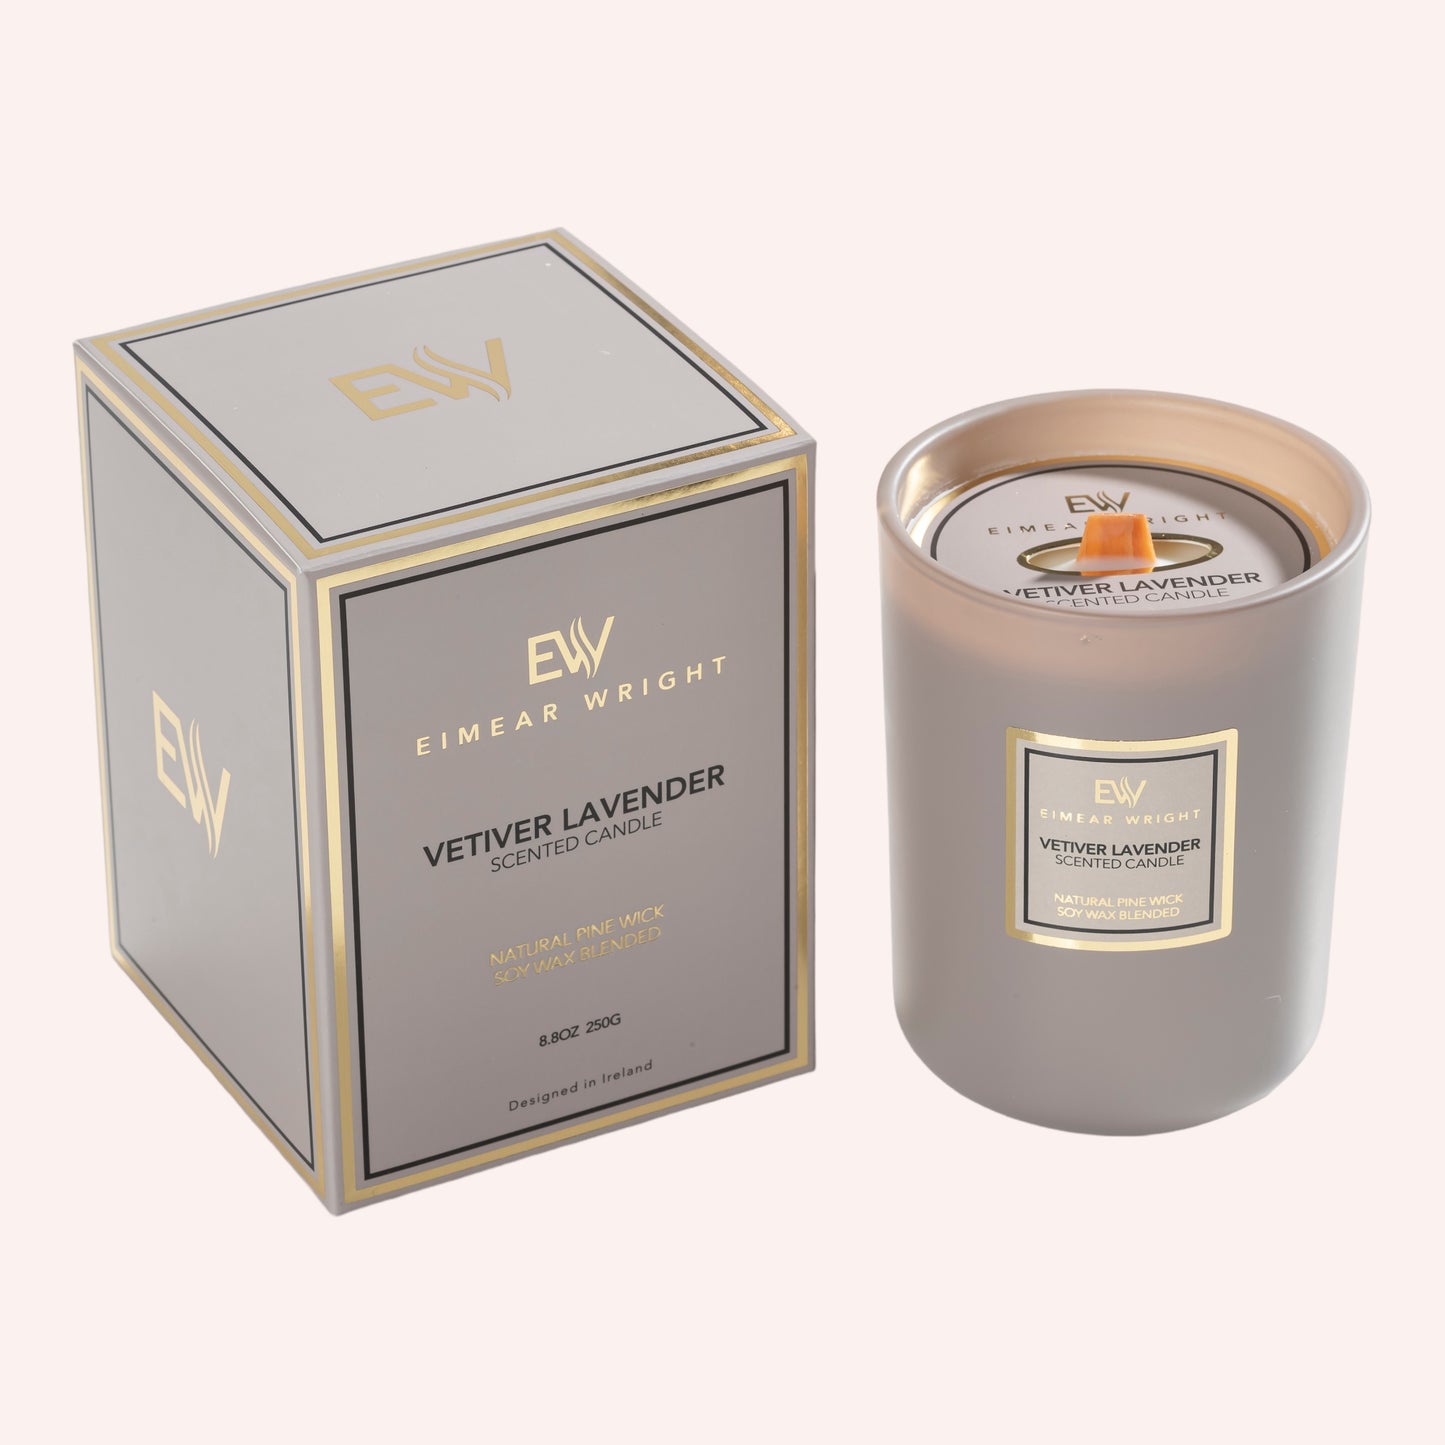 Eimear Wright Vetiver Lavender Scented Candle